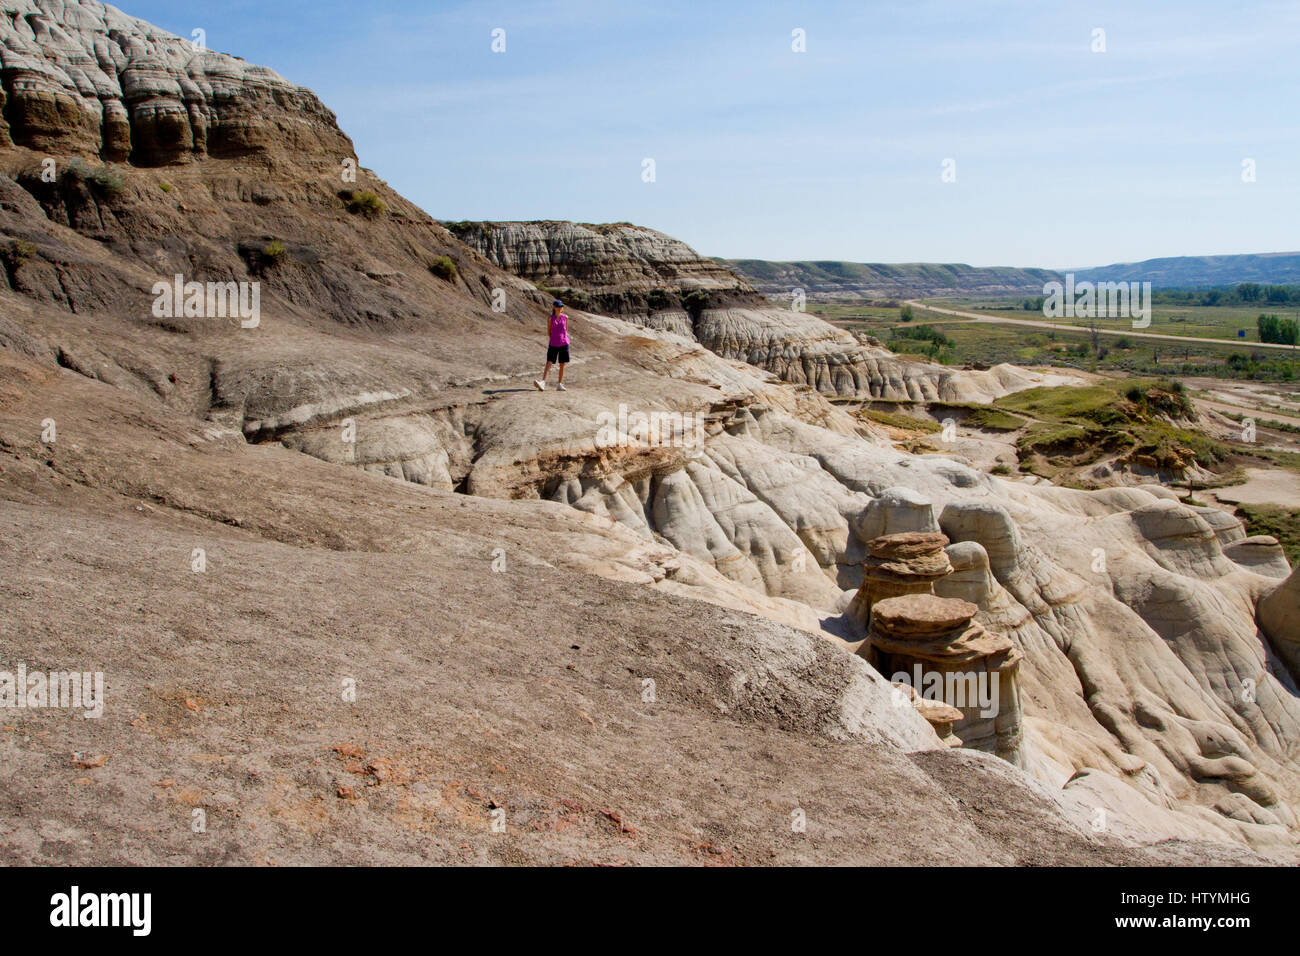 Hoodoos, geological formations created by erosion, in the Badlands near Drumheller, Alberta, Canada. Stock Photo